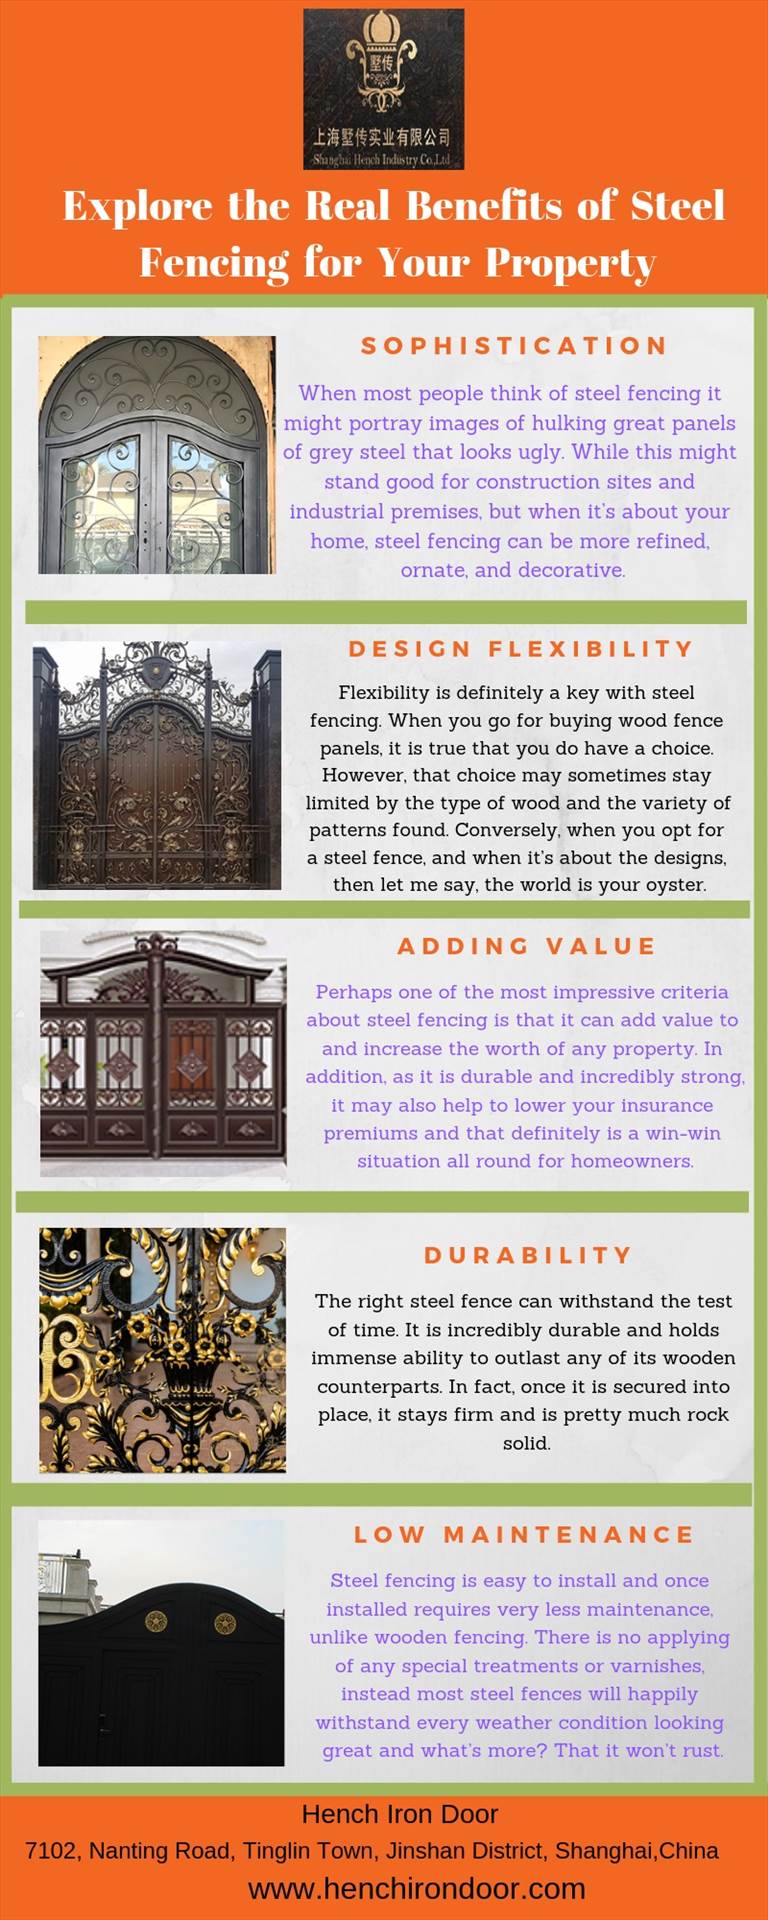 Explore the Real Benefits of Steel Fencing for Your Property.jpg  by Henchirondoor